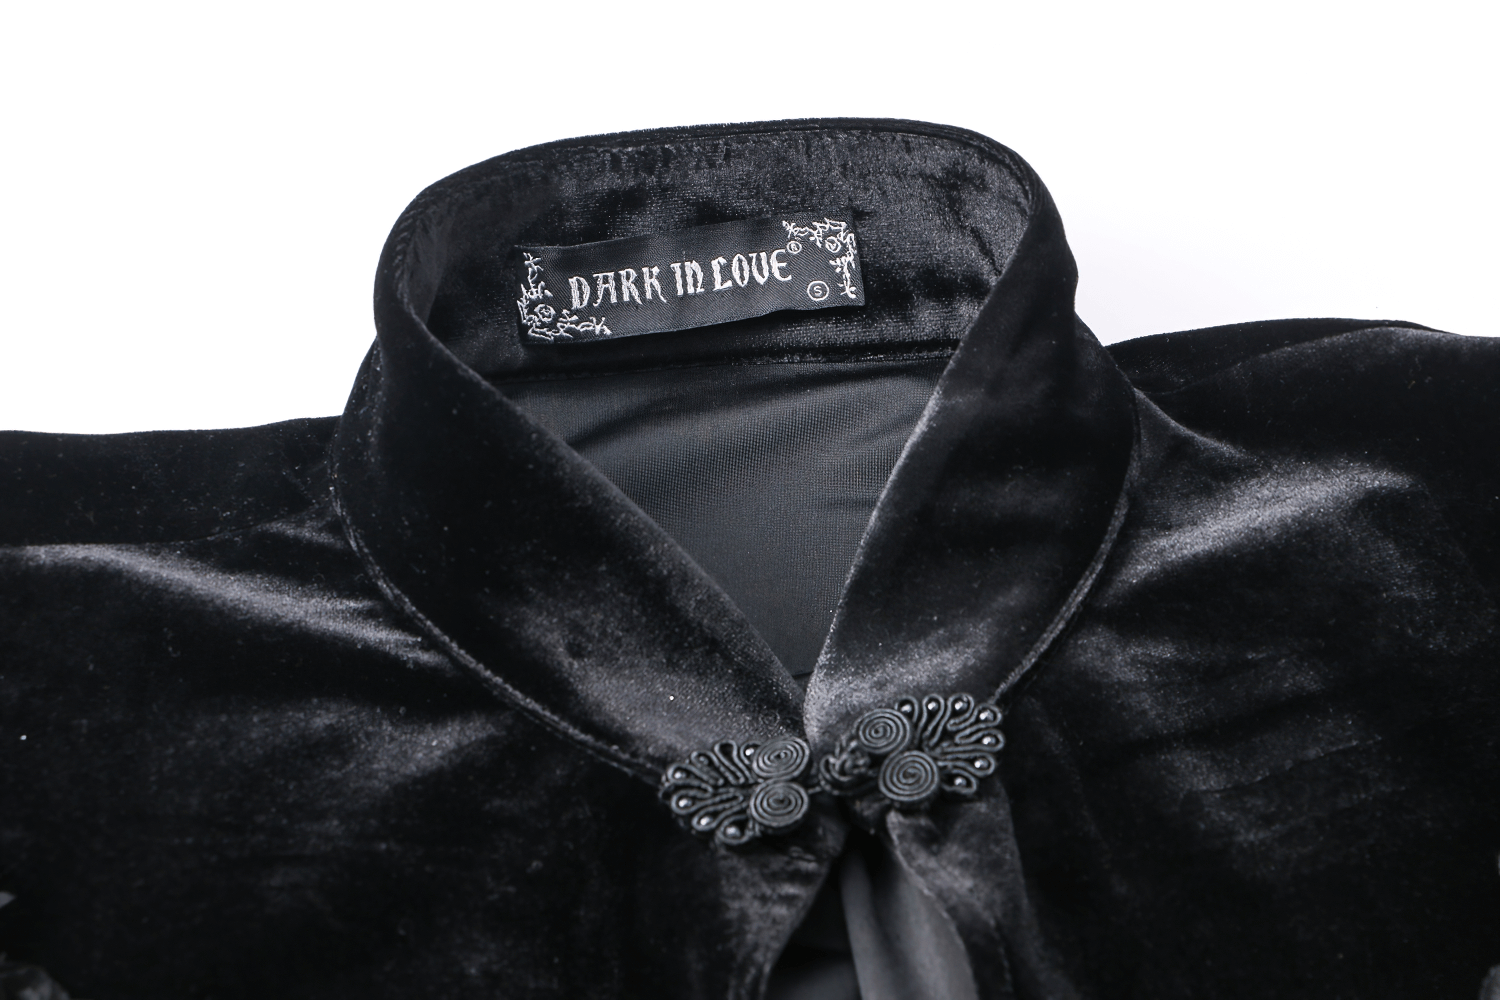 Vintage Gothic Velvet Capelet with Lace and Pearls